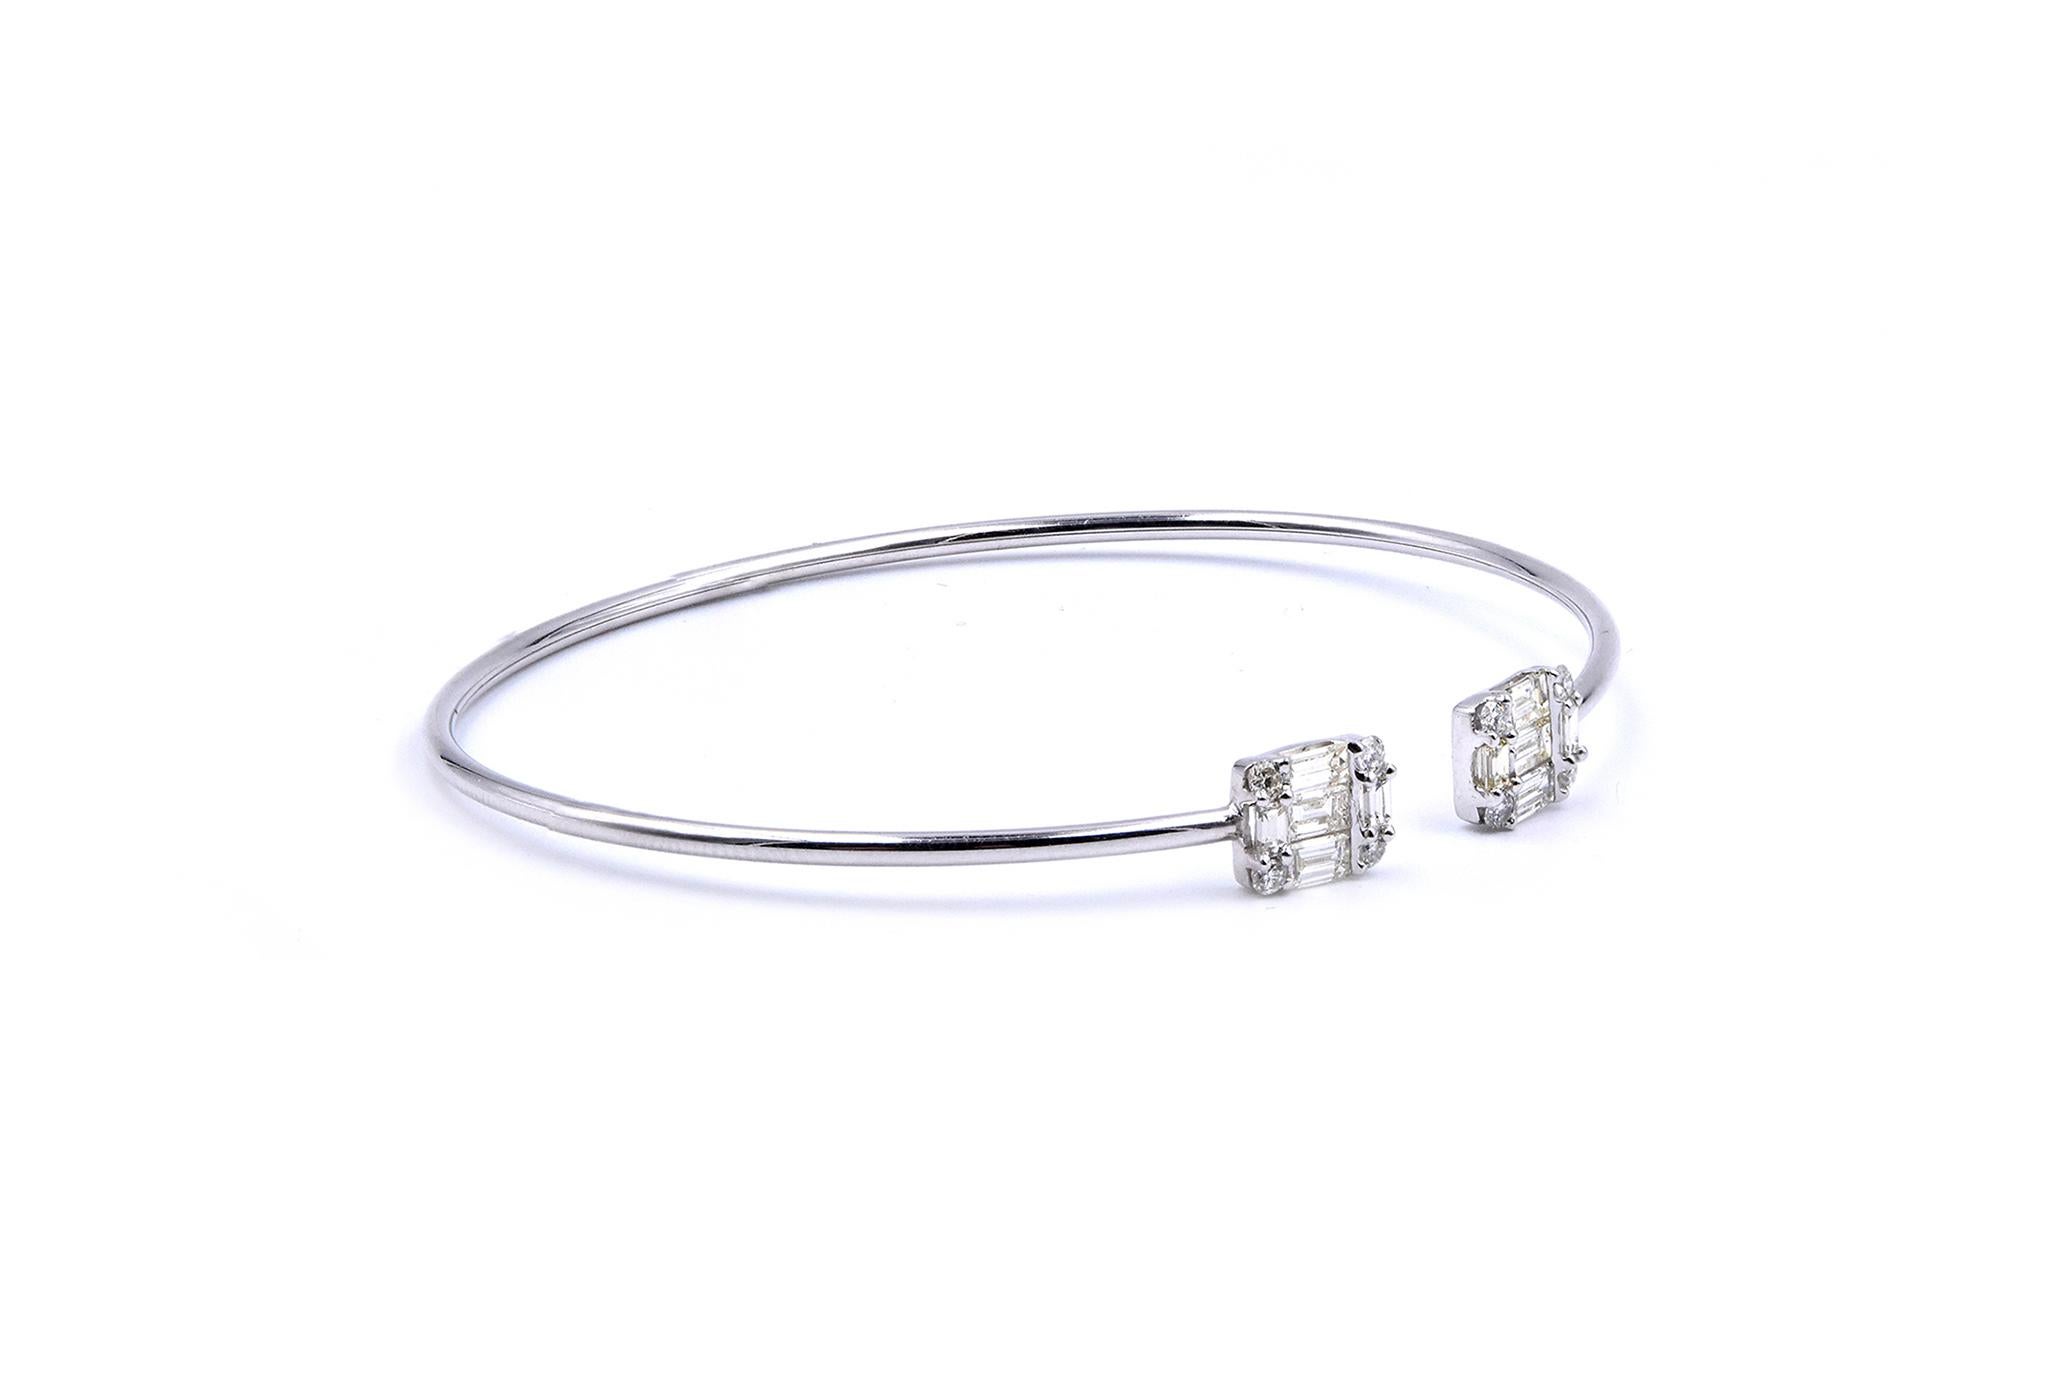 Material: 18K white gold
Diamonds: 10 baguette & 8 round cut = 1.00cttw
Color: H
Clarity: SI1
Dimensions: bracelet will fit up to a 6-inch wrist
Weight: 4.01 grams